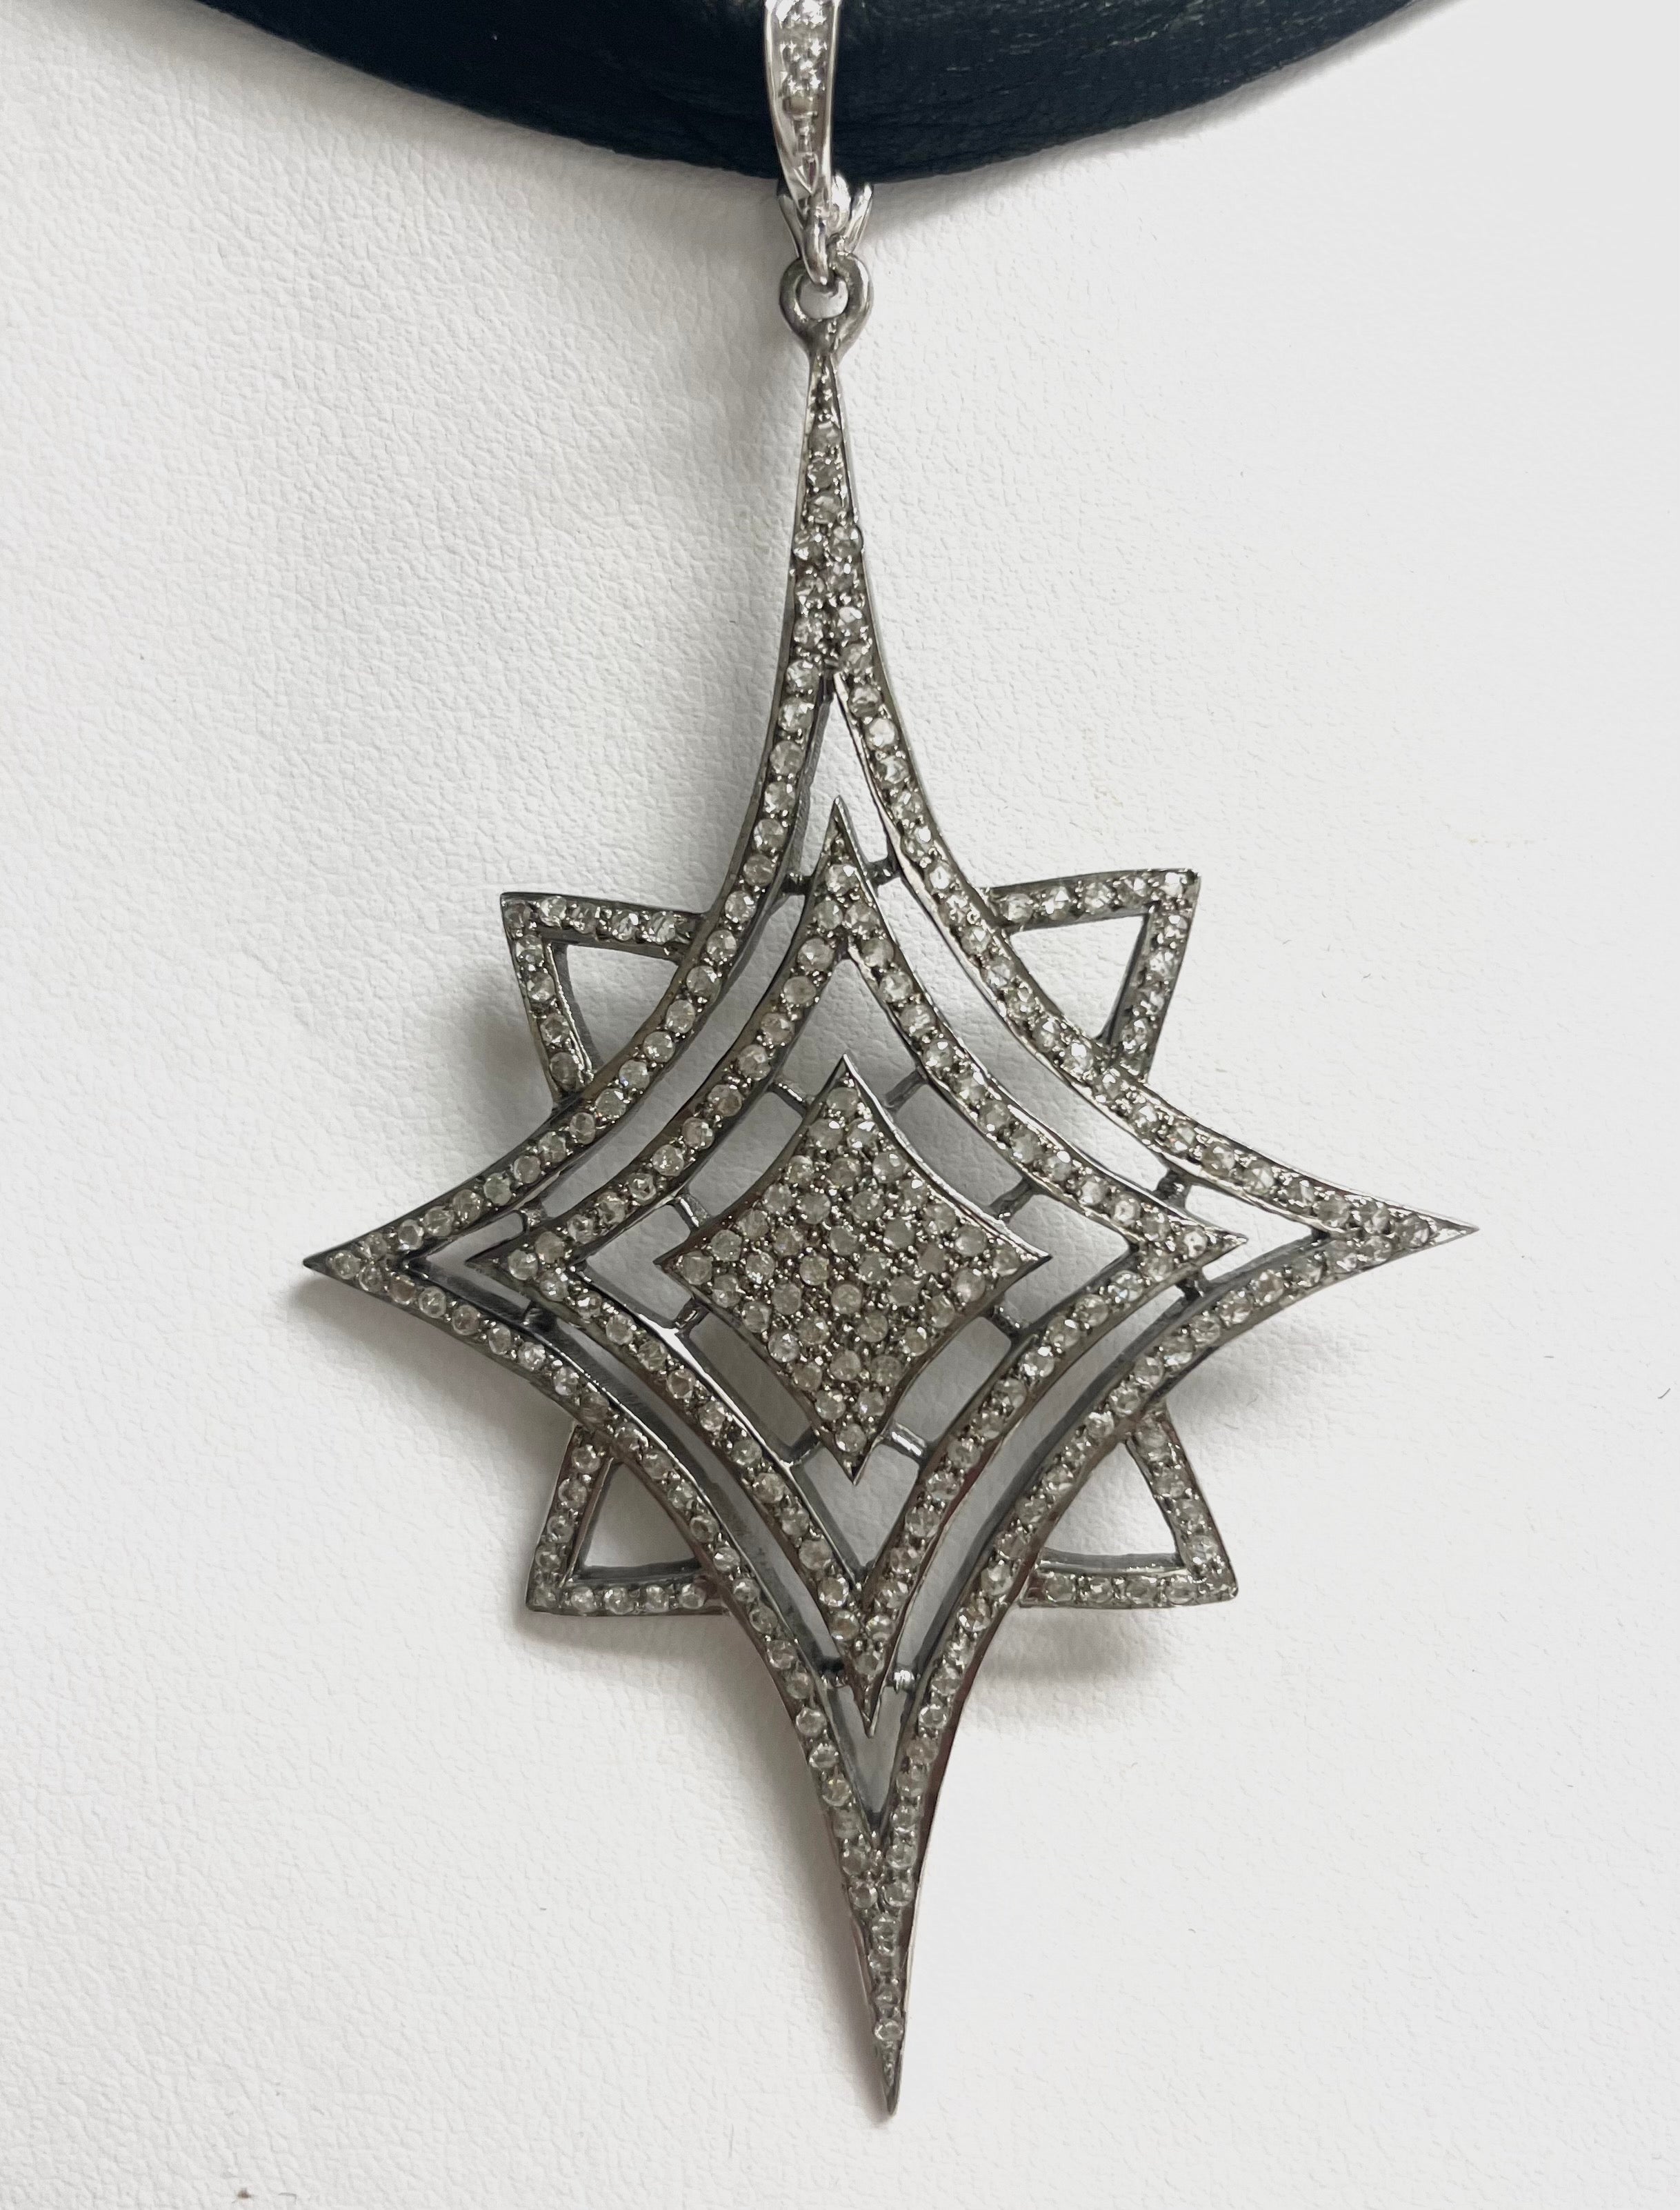  Pave Diamond Starburst Pendant on Deerskin Choker Necklace In New Condition For Sale In Laguna Beach, CA